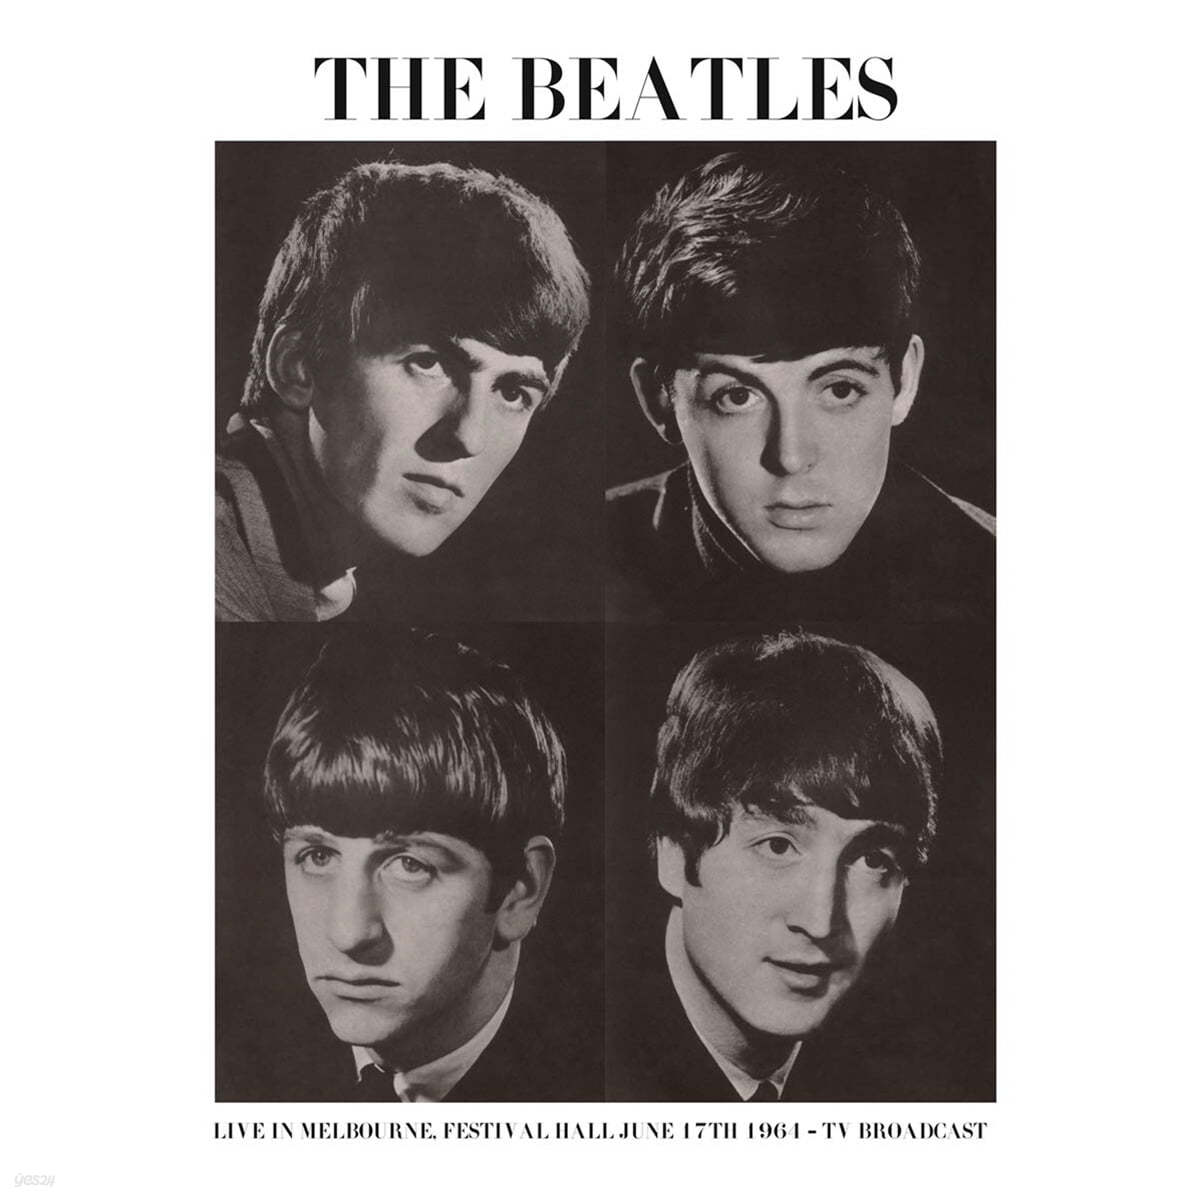 The Beatles (비틀즈) - Live In Melbourne, Festival Hall June 17th 1964 : TV Broadcast [LP] 